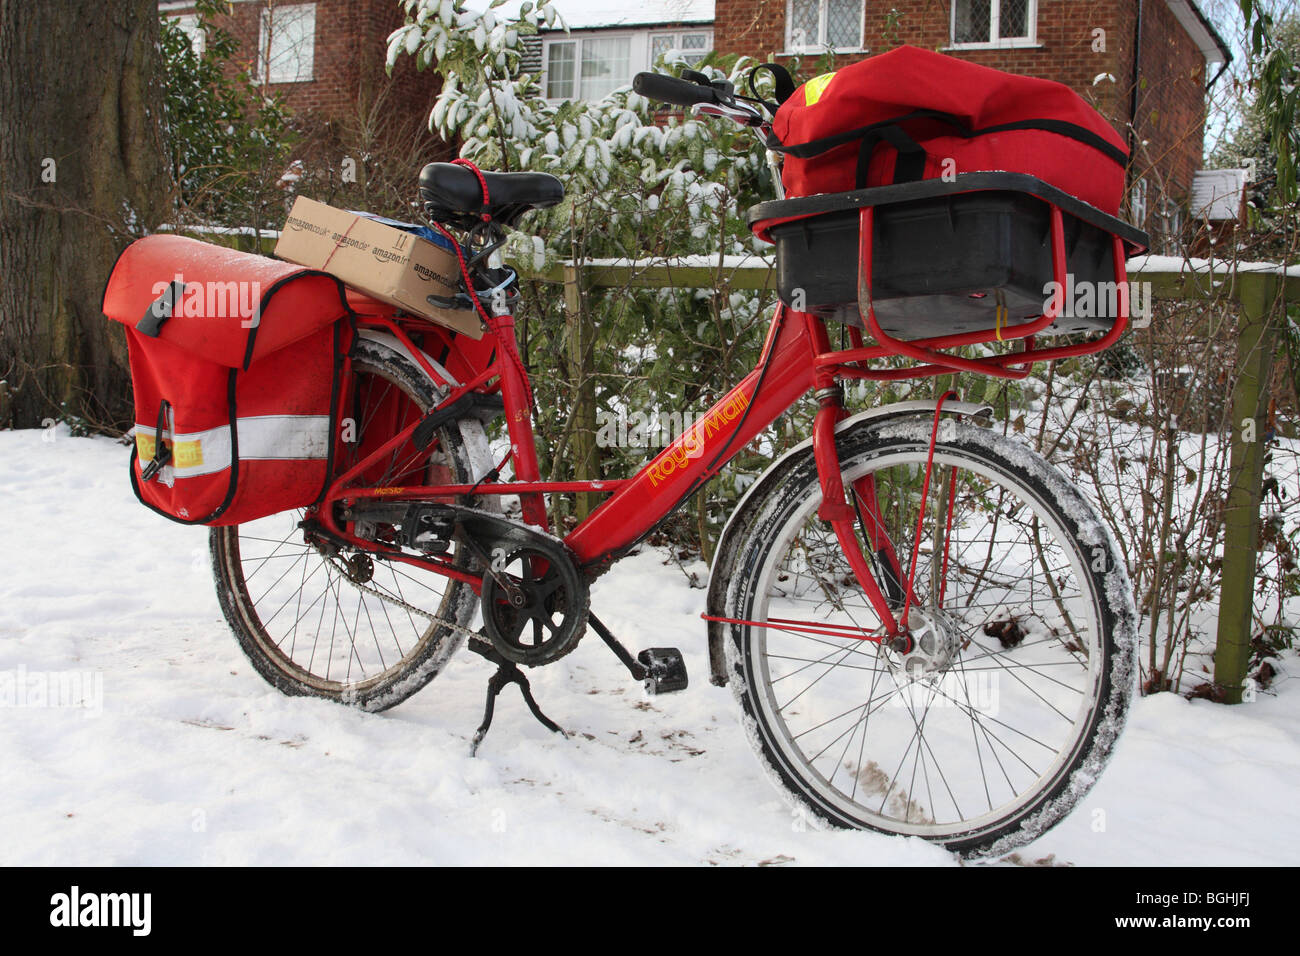 Royal Mail Bike High Resolution Stock Photography and Images - Alamy